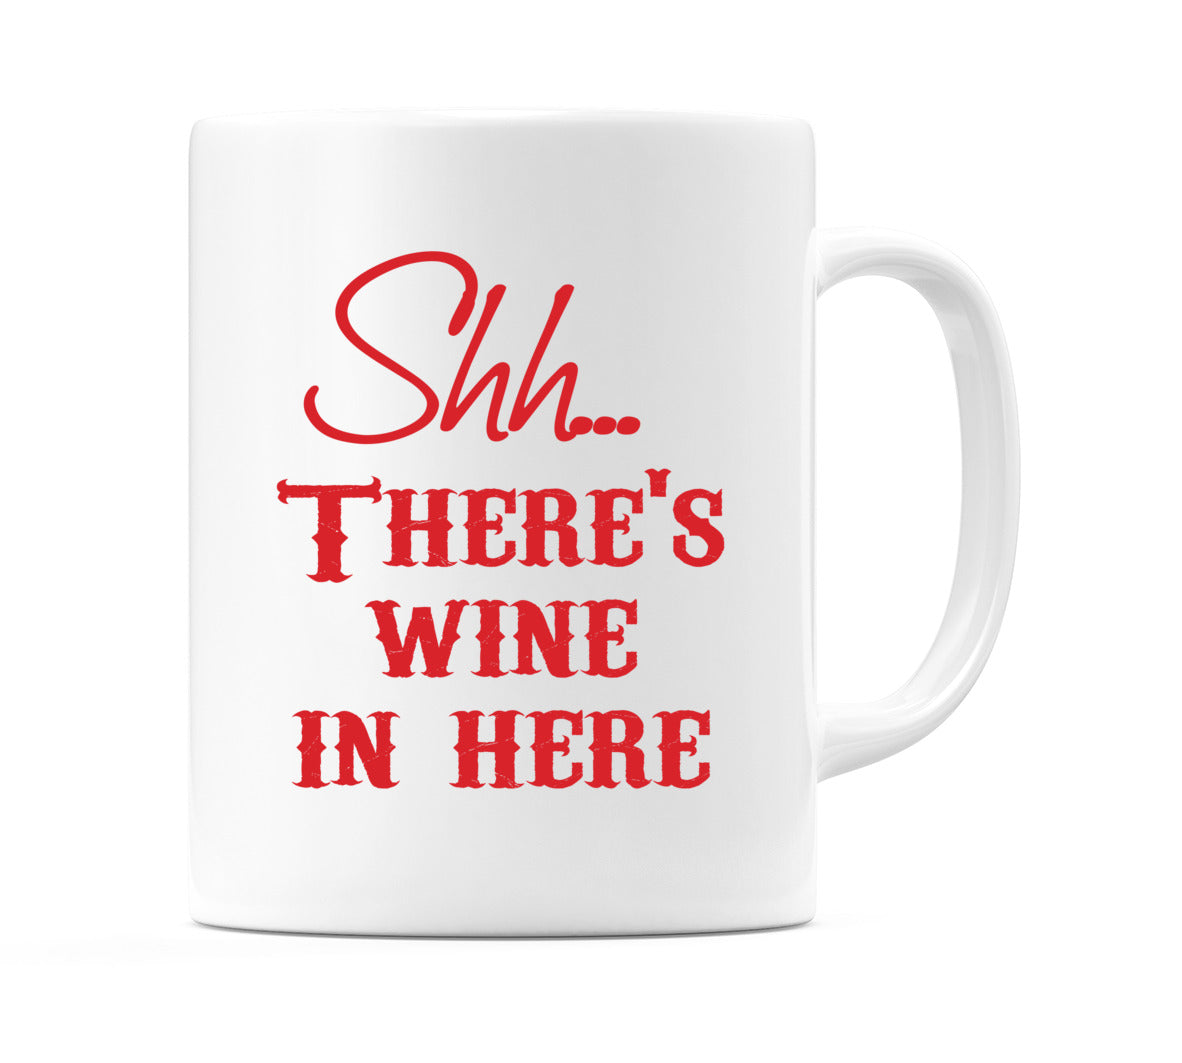 Shh There's Wine In Here Mug